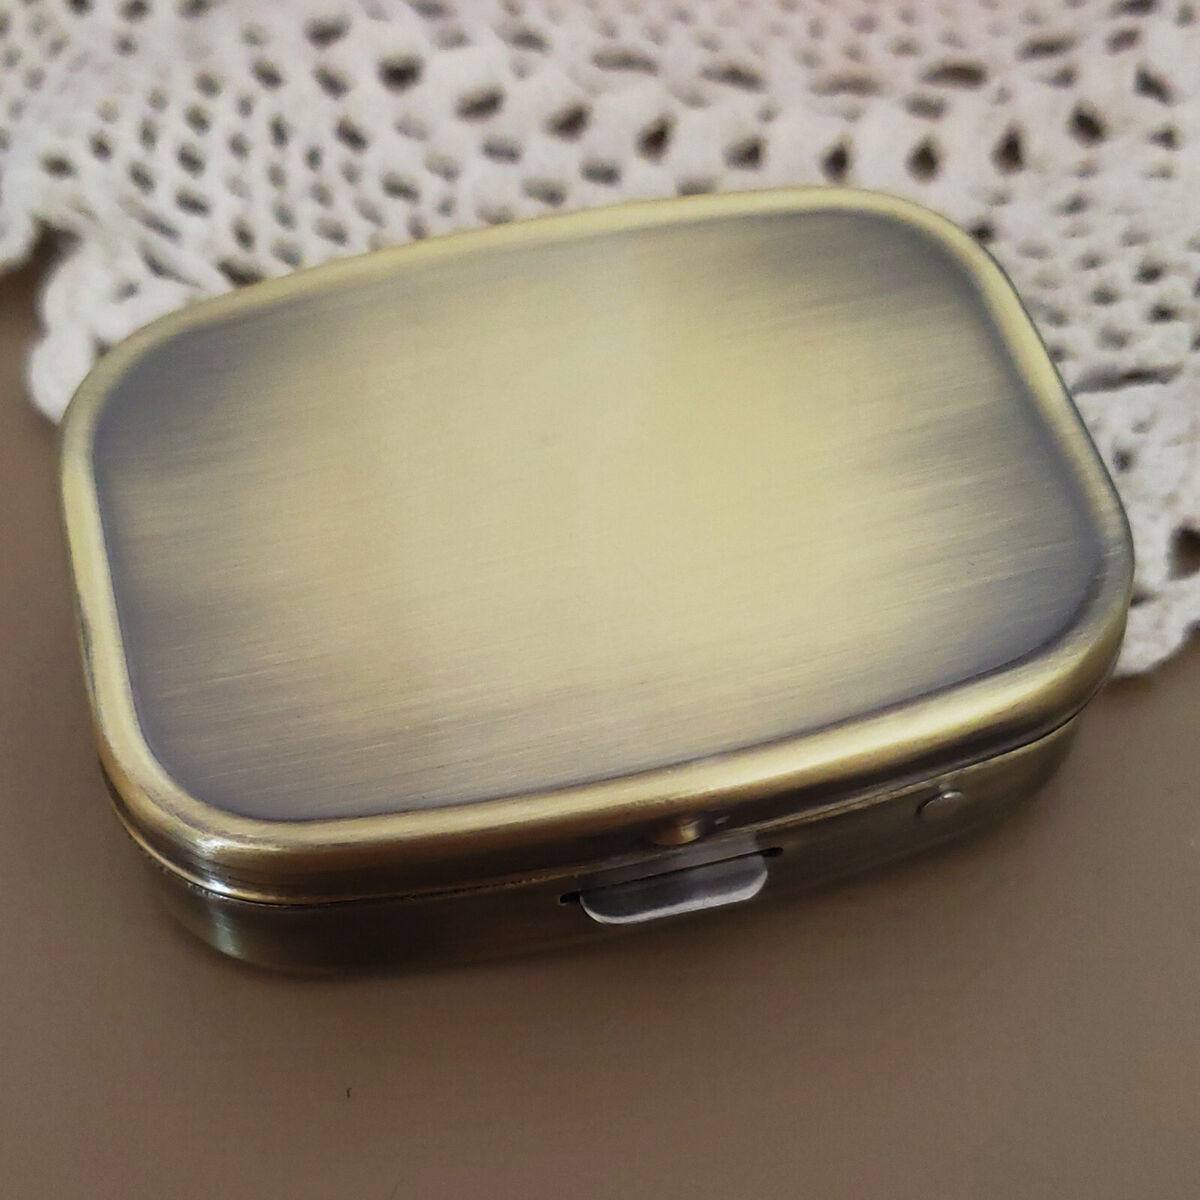 Houder Classy Brass Pill Box - Decorative Pill Case with Gift Box - Carry Your Meds in Style (Round)